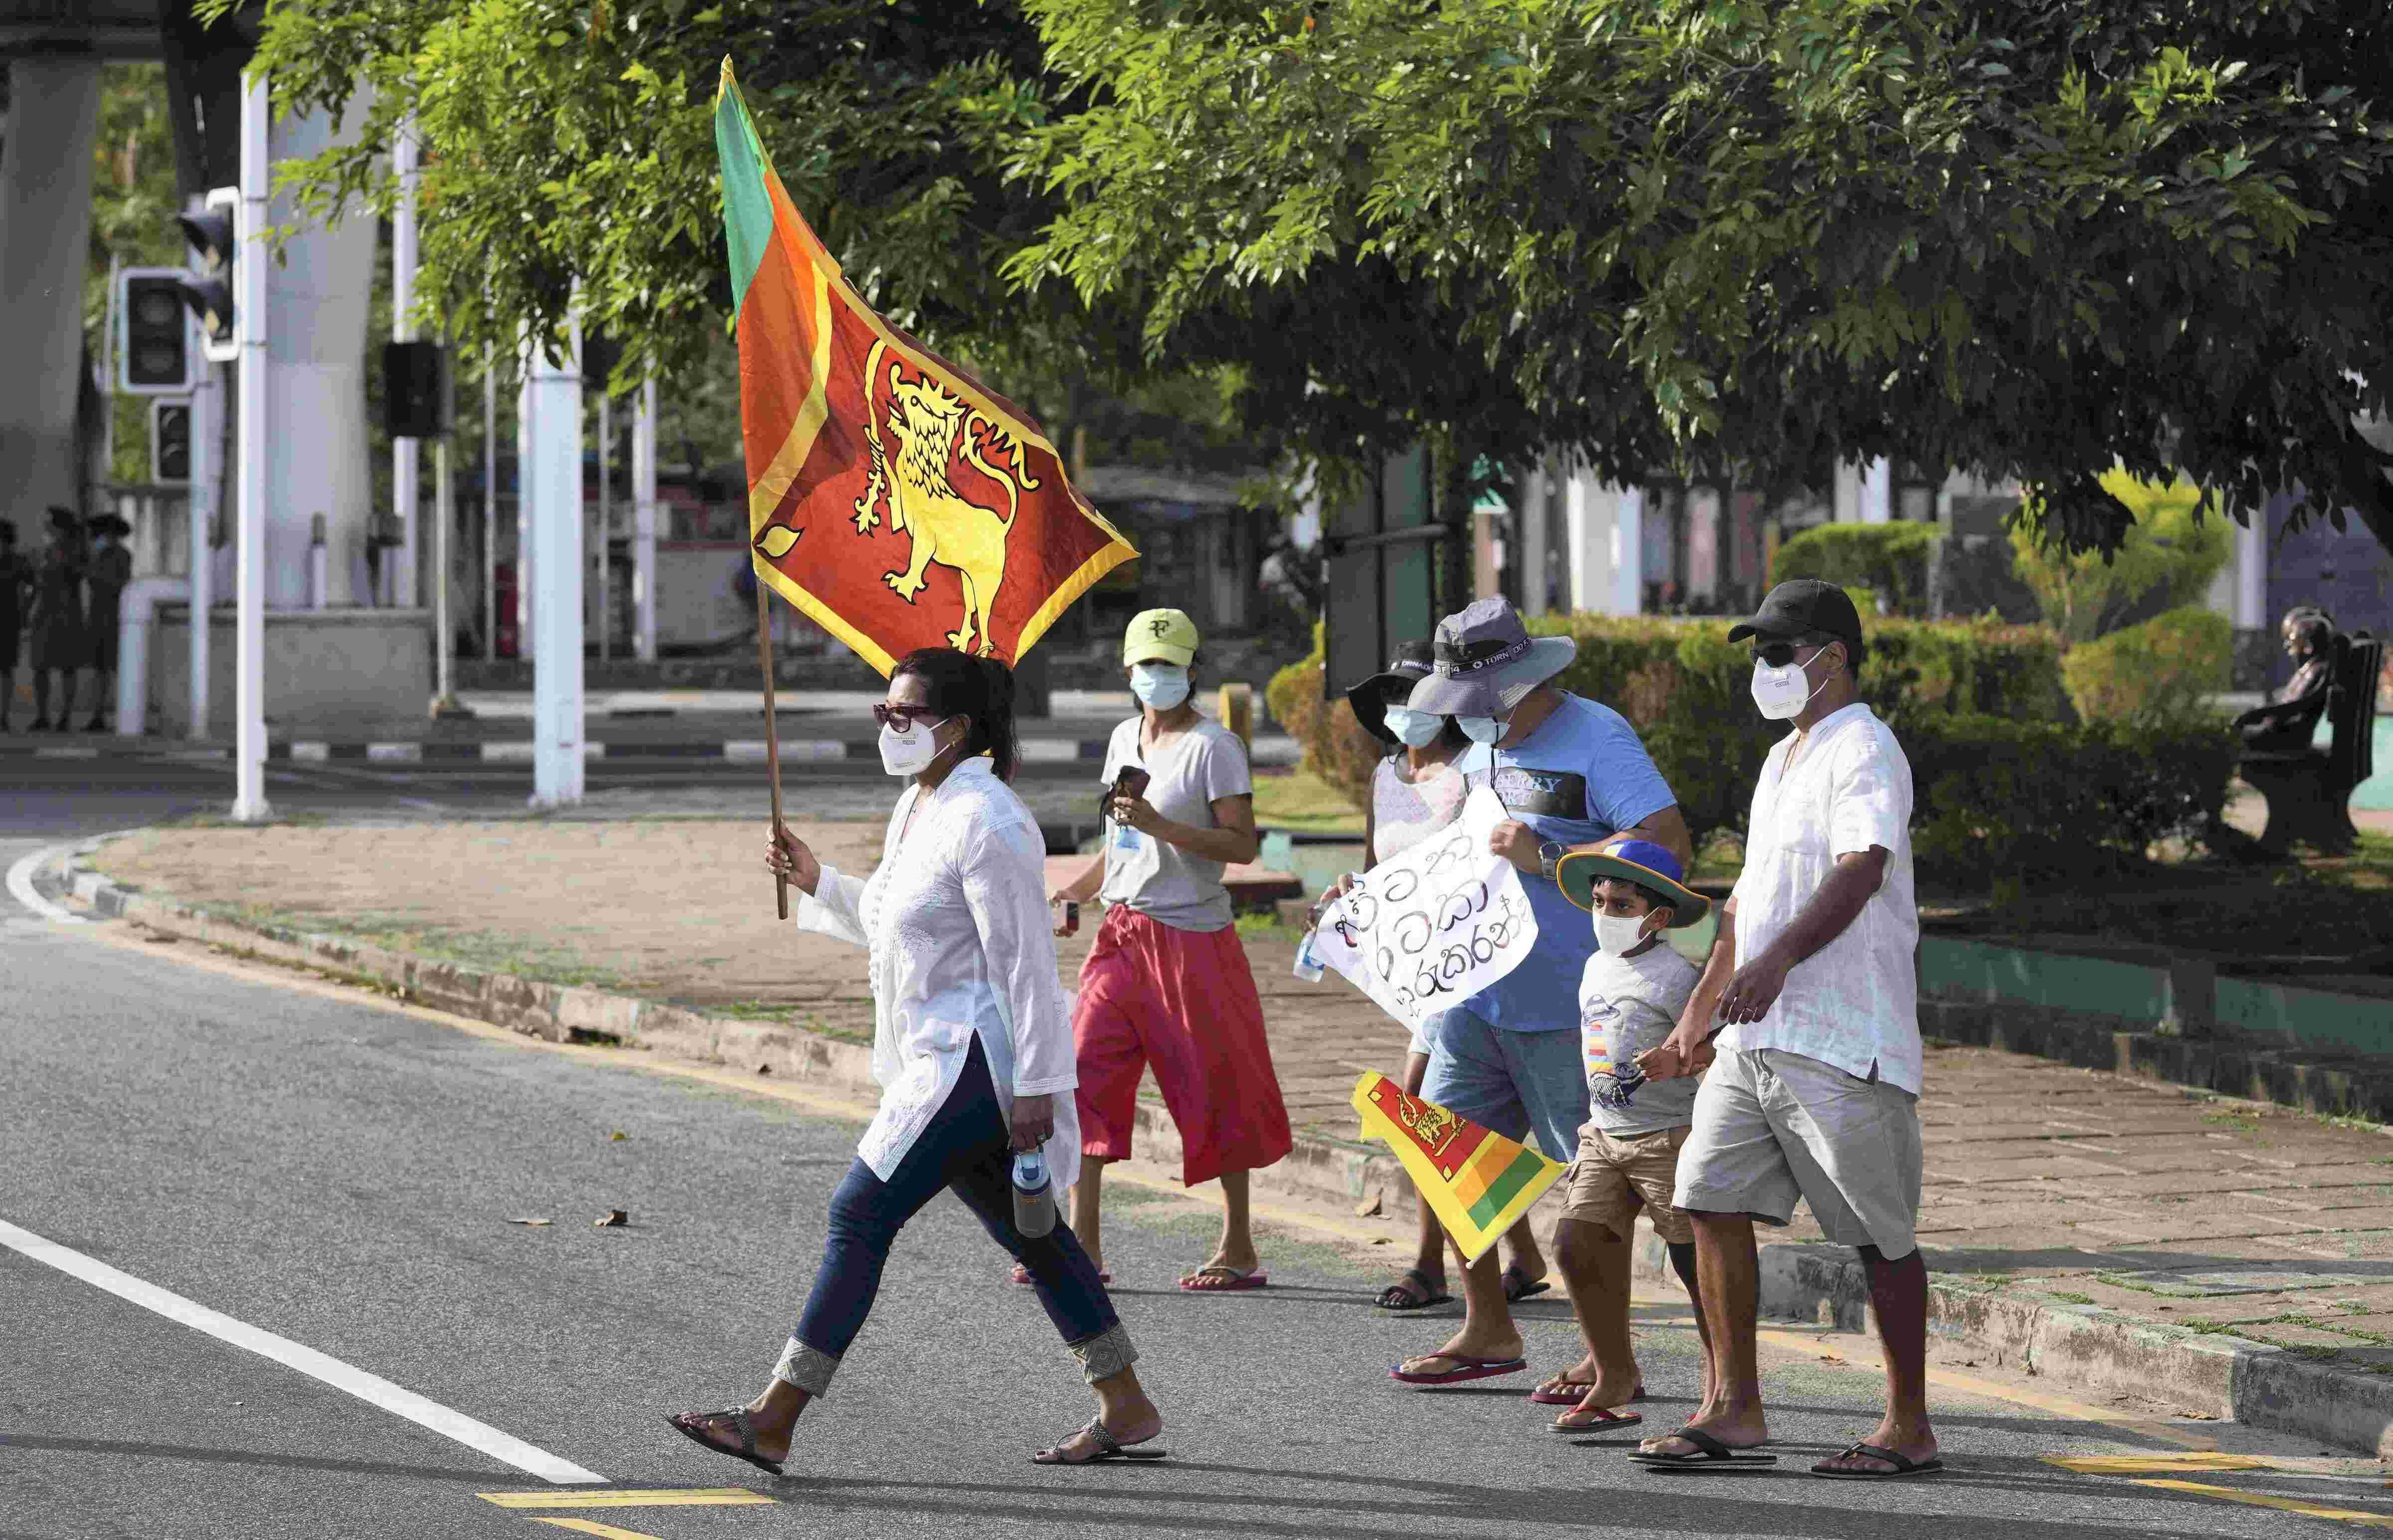 Lankan Oppn leader says working people have to observe Black May Day due to reckless govt policies